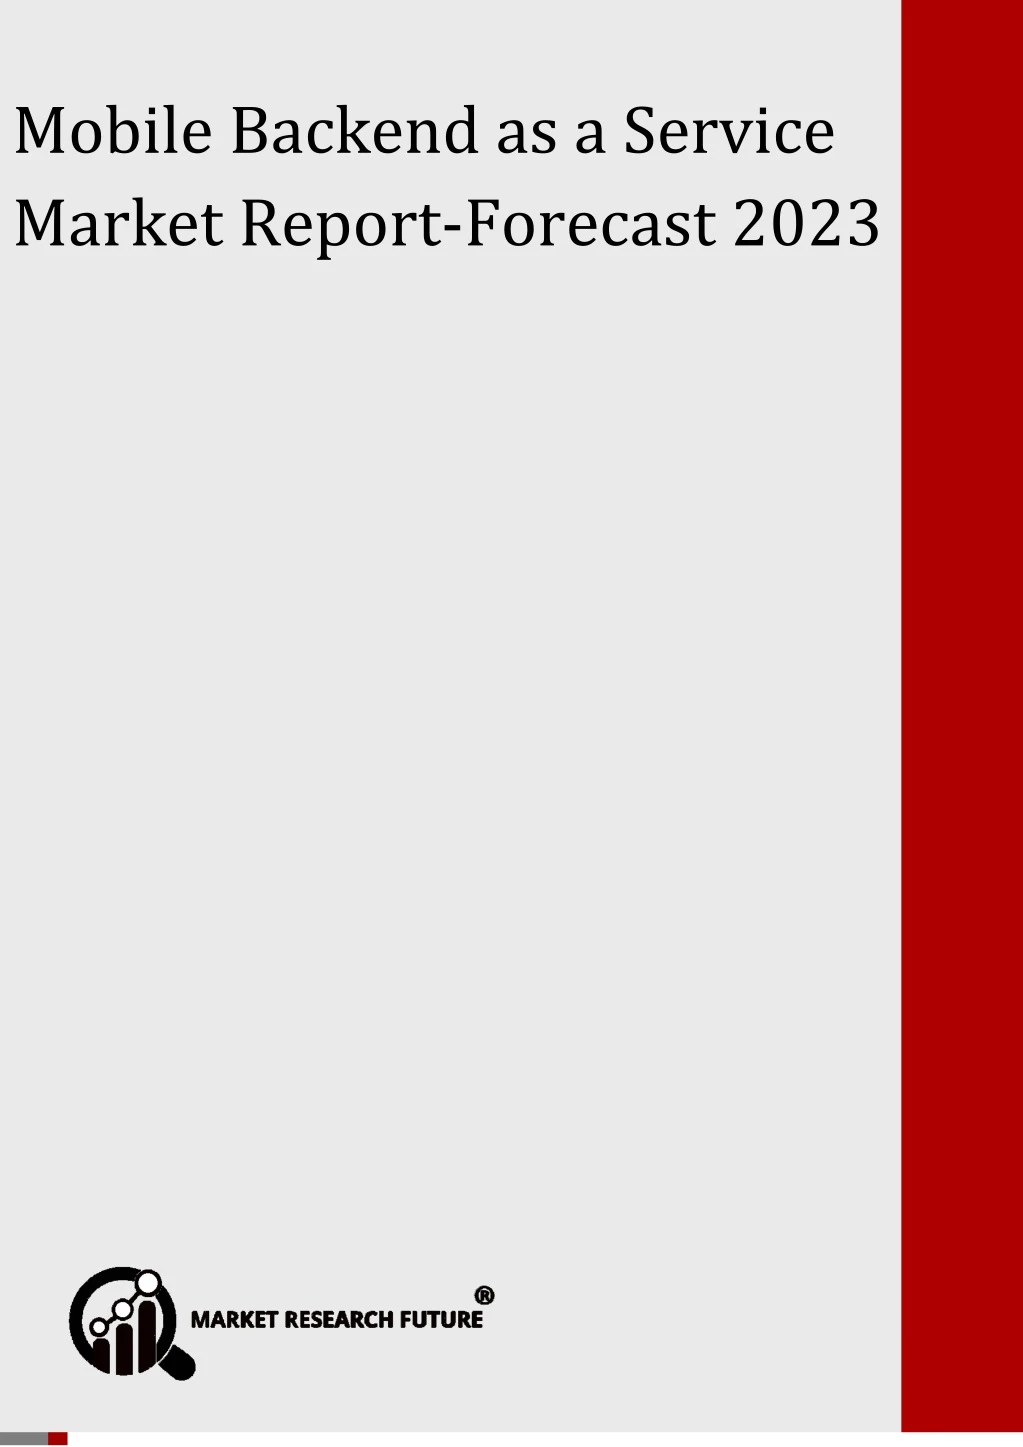 mobile backend as a service market forecast 2023